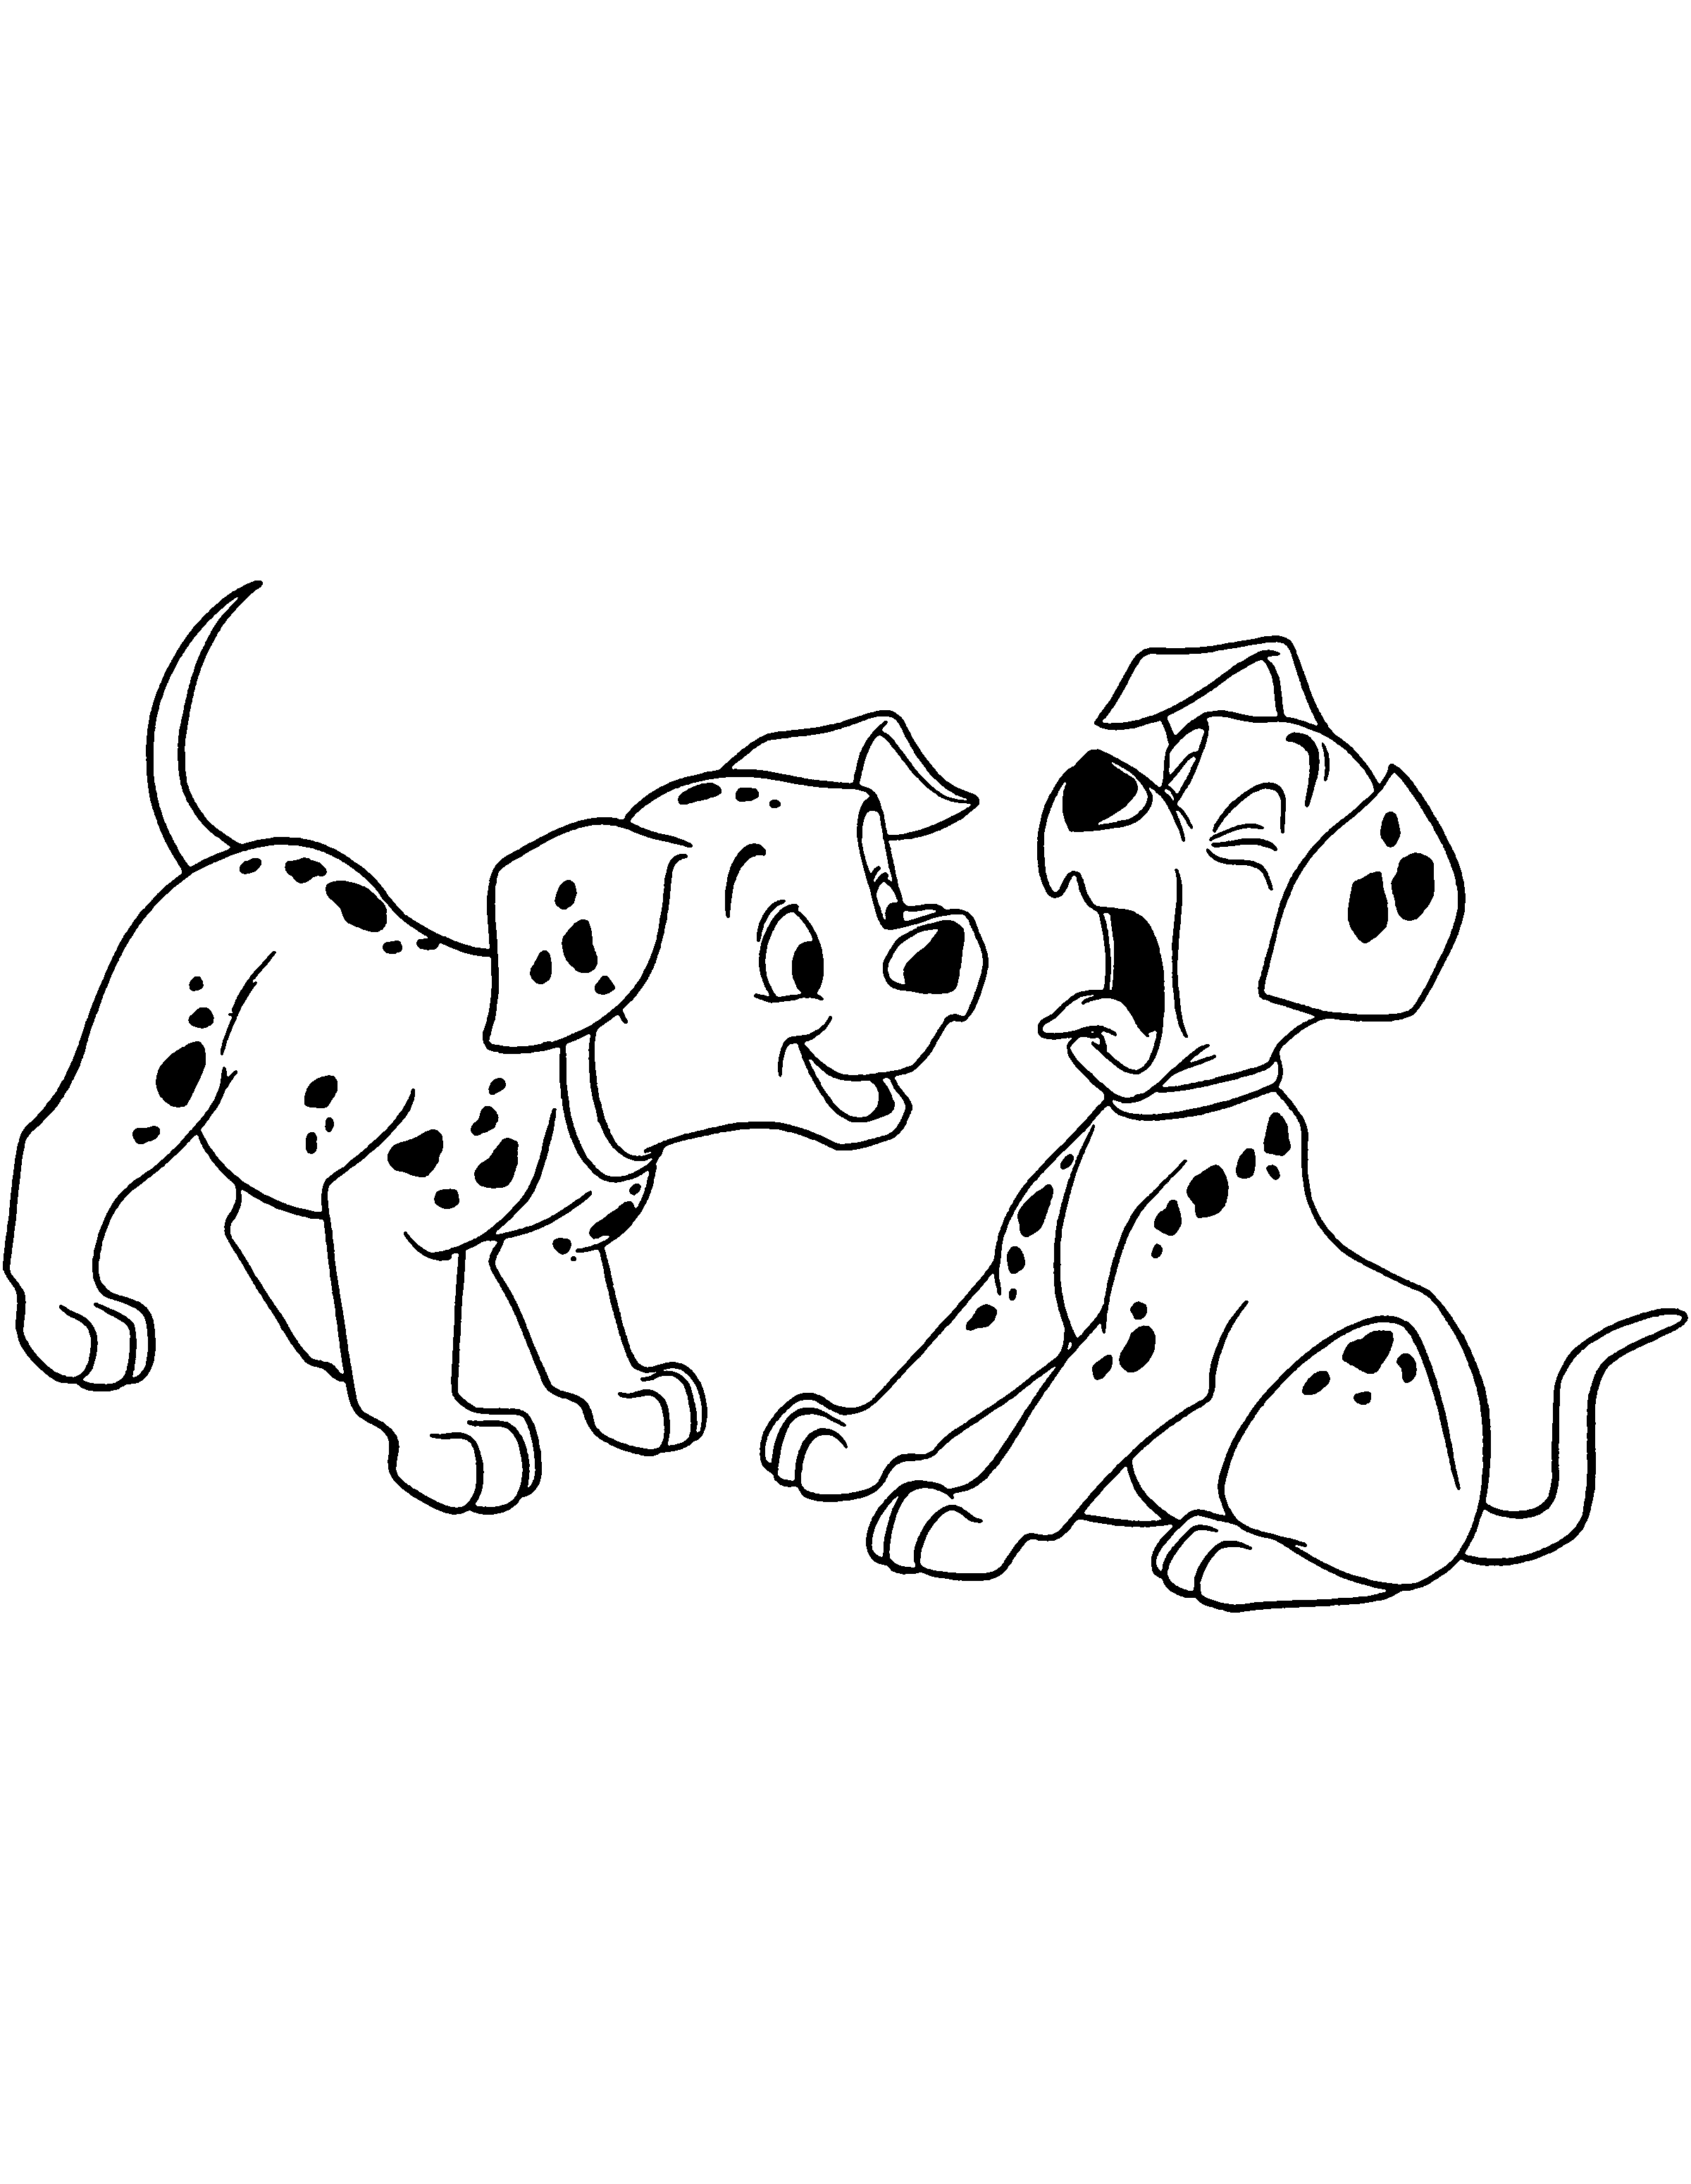 101 Dalmatians Poodle Coloring Pages - Coloring Pages For All Ages